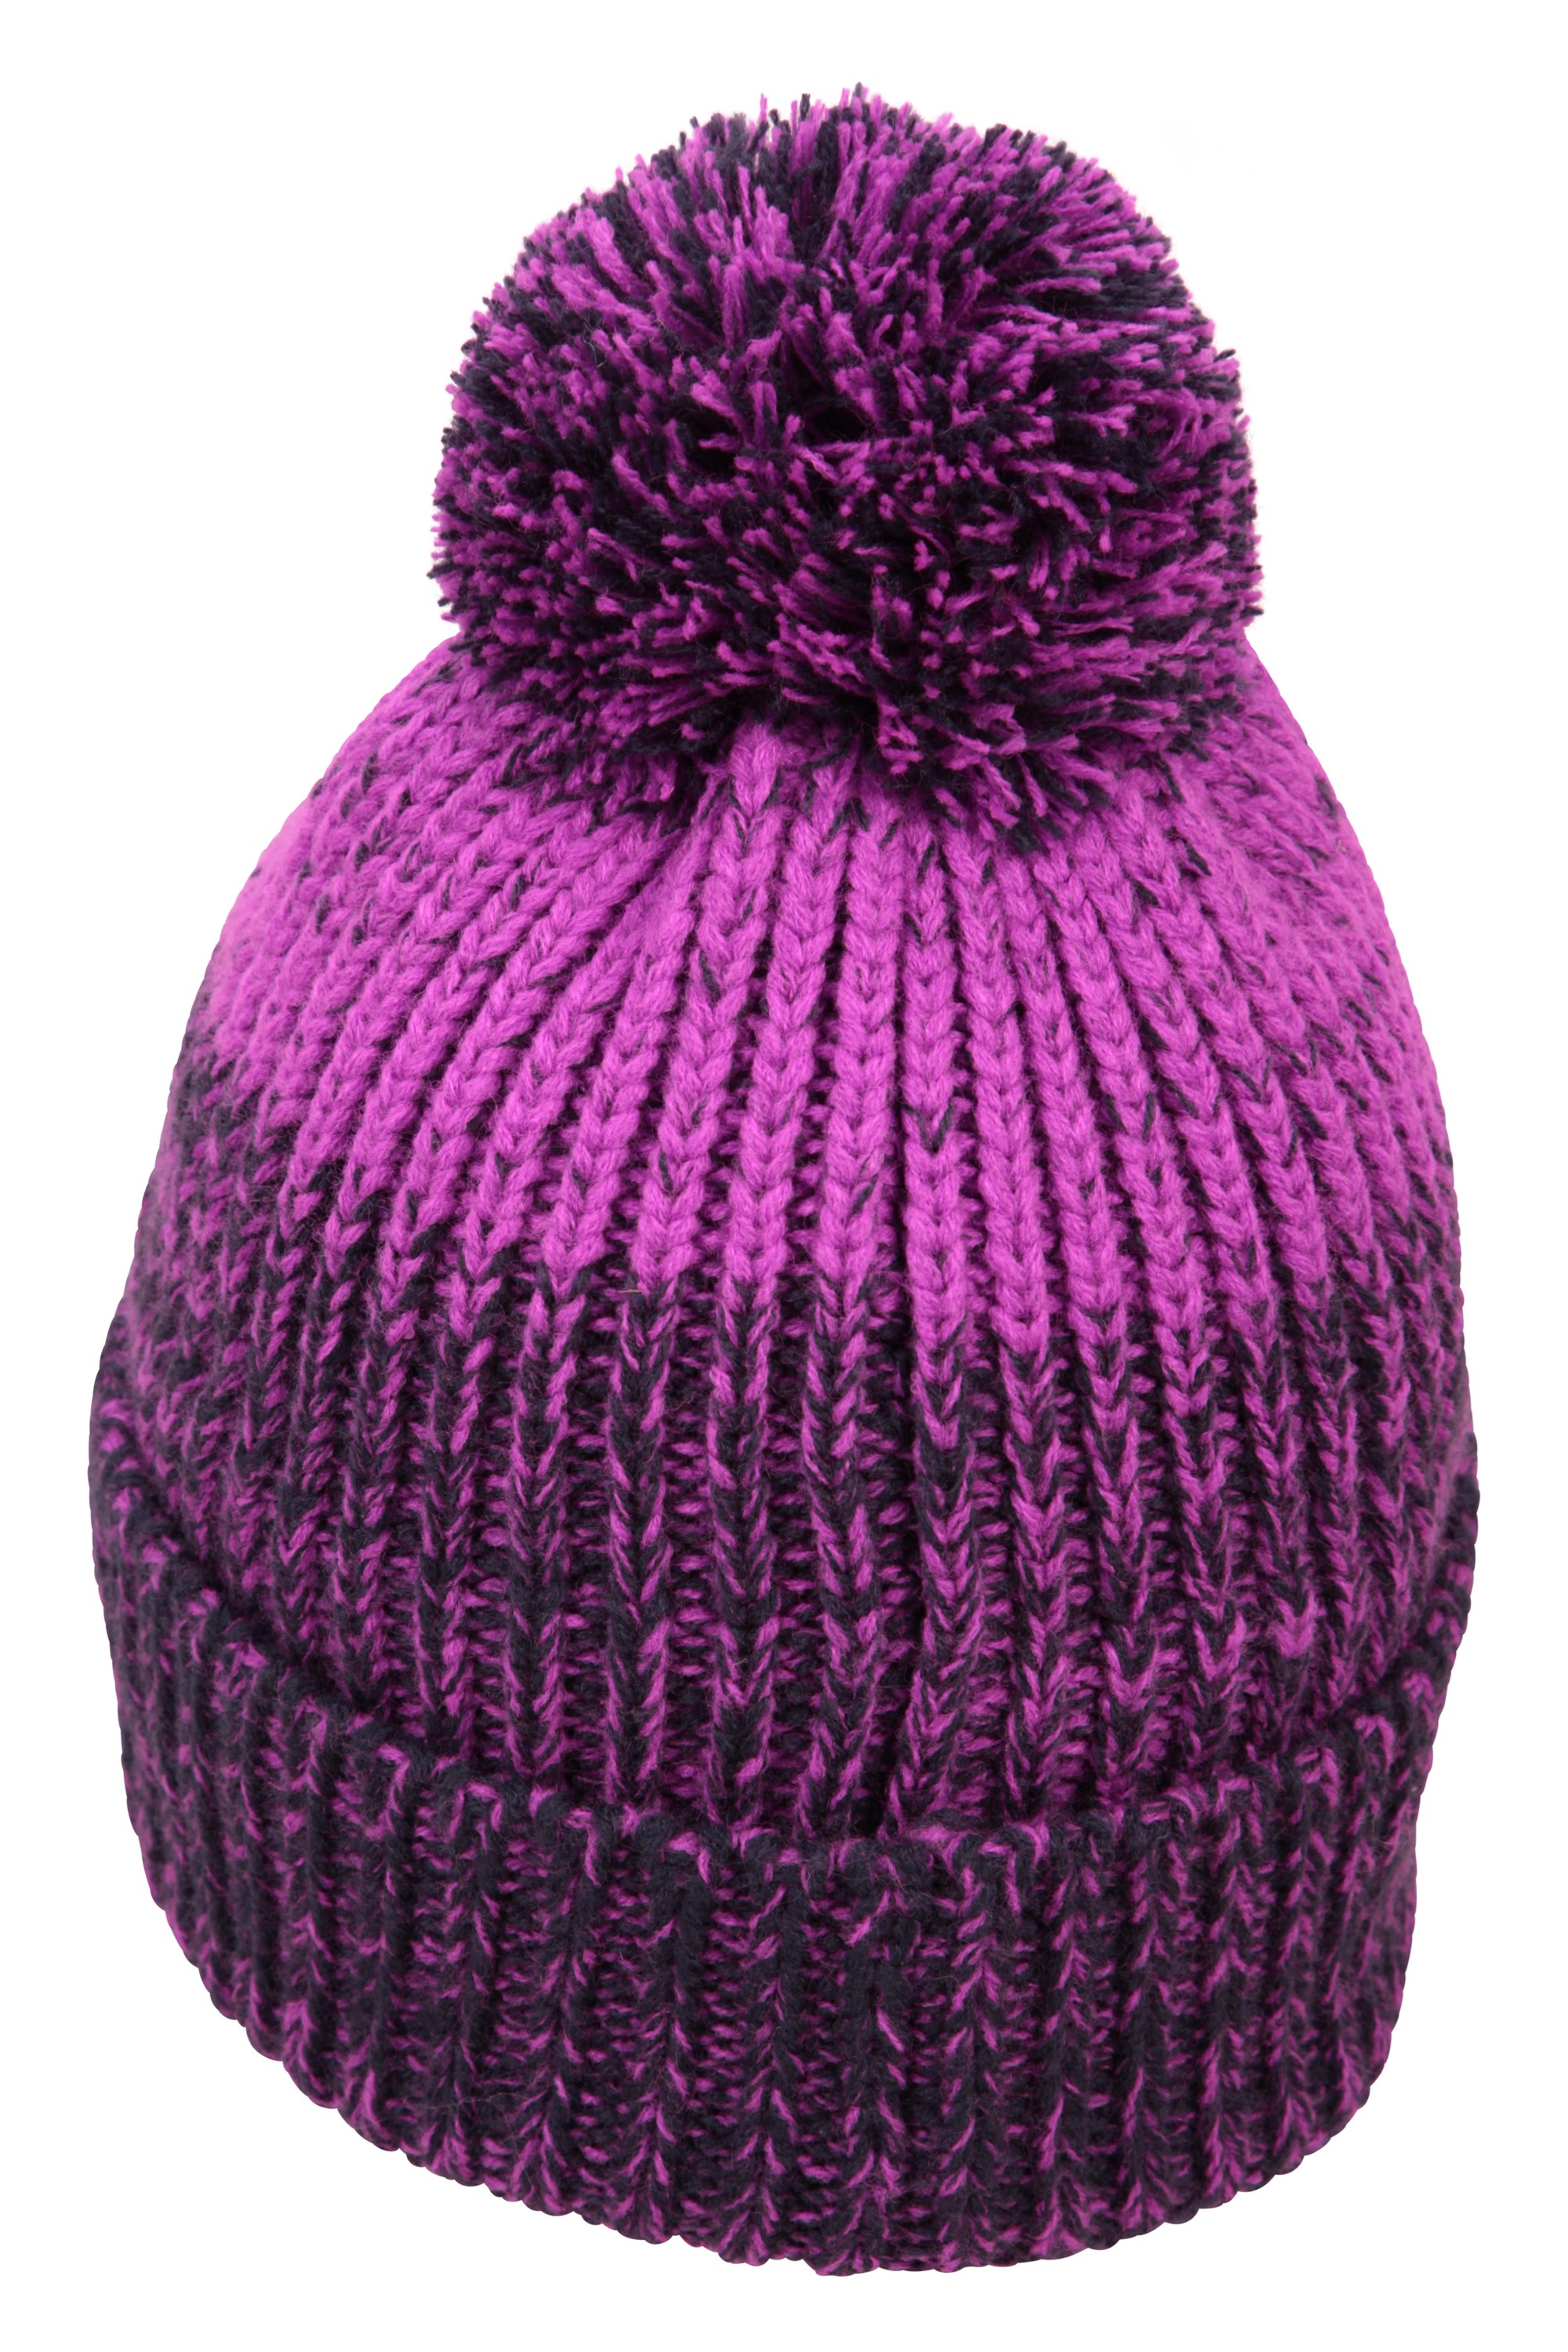 Details about   Mountain Warehouse Womens Bobble Hat with Ear Flaps & Long Tassels Ladies 